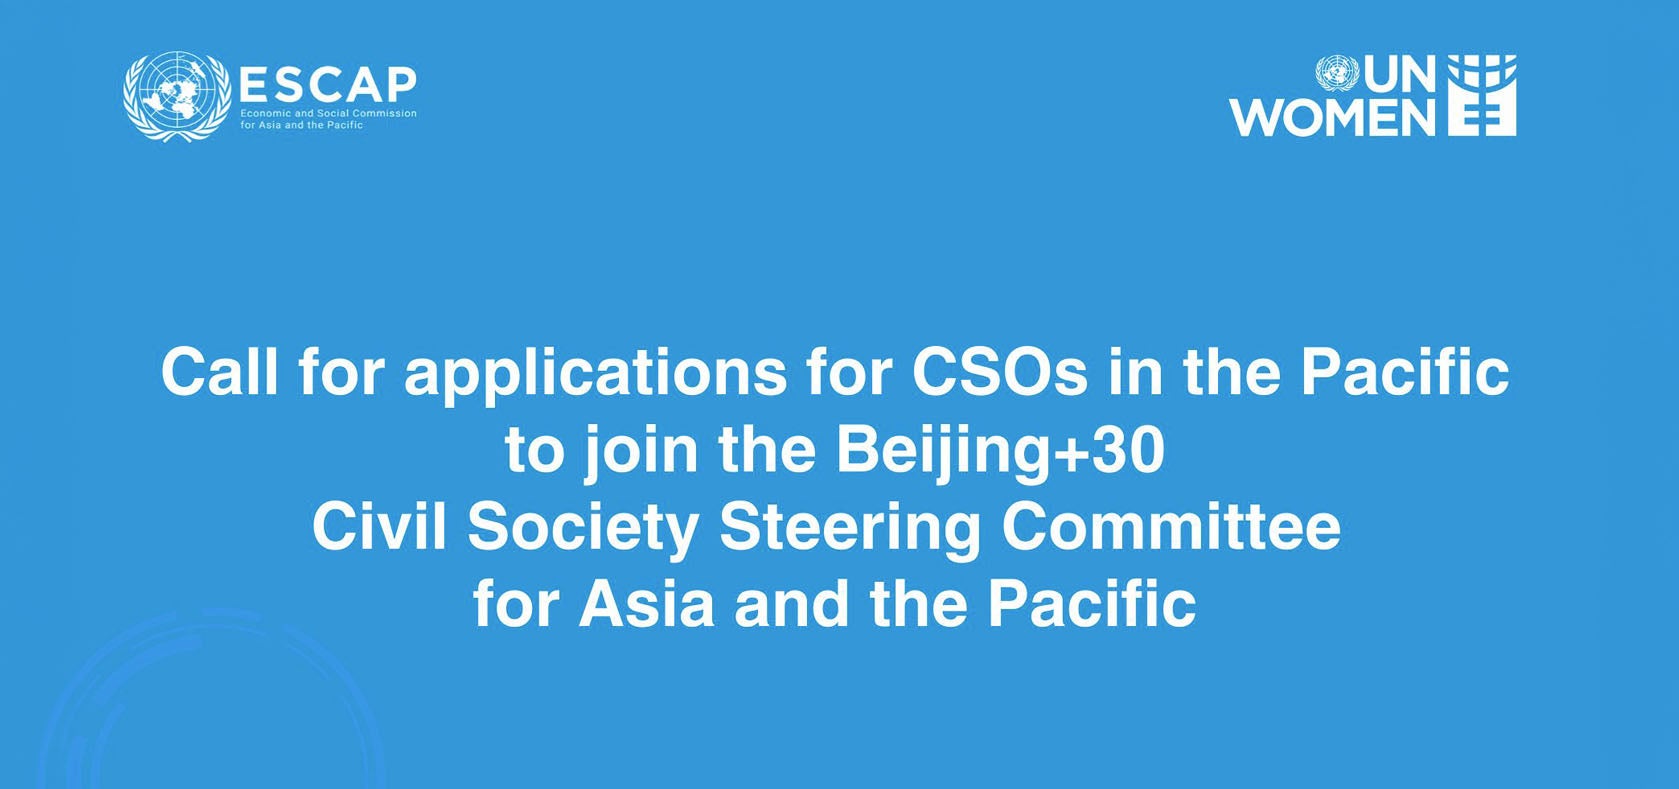 Call for applications for CSOs in the Pacific to join the Beijing+30 Civil Society Steering Committee for Asia and the Pacific